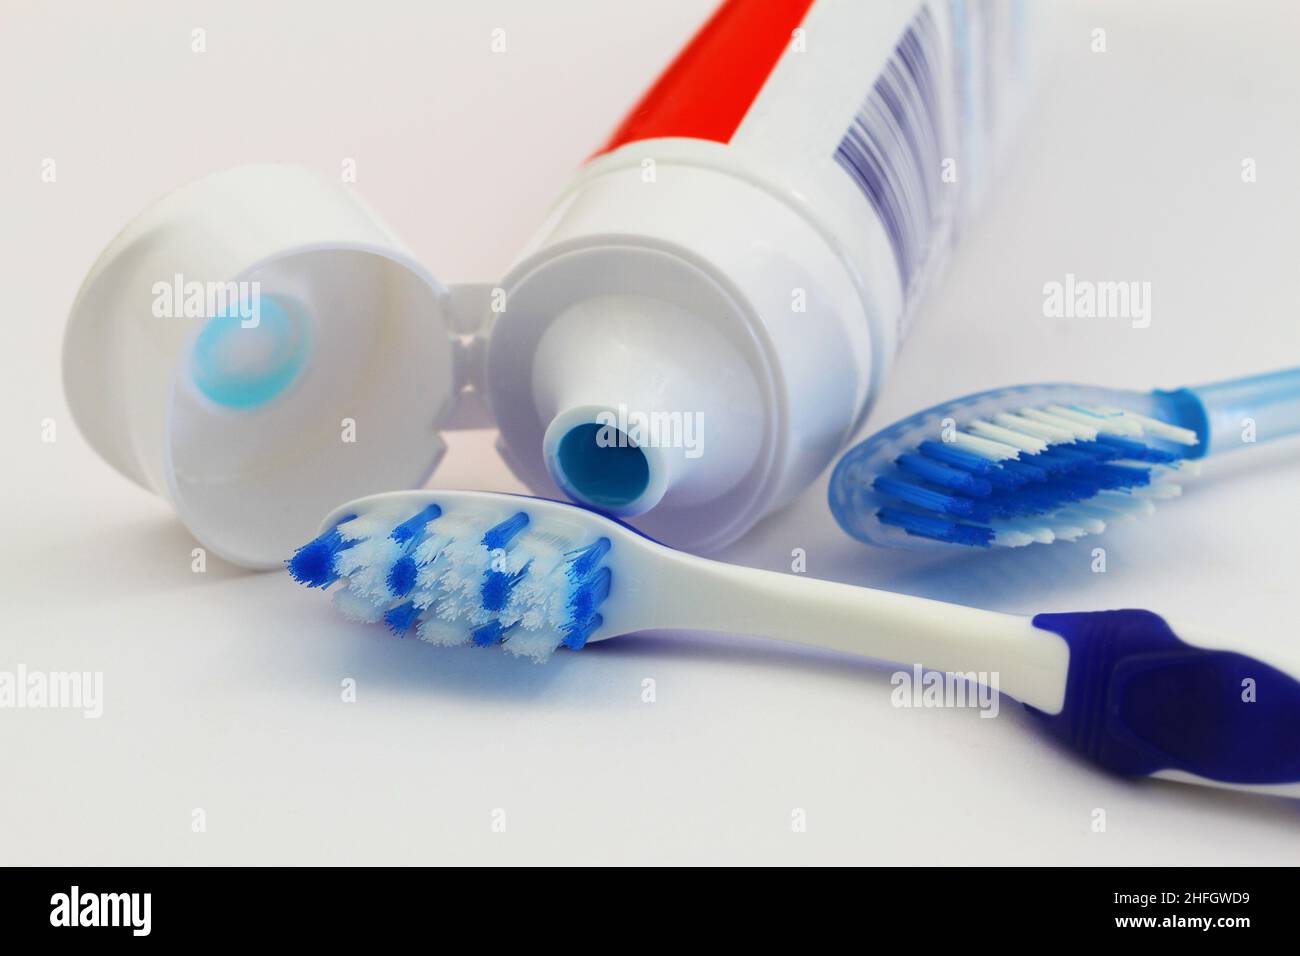 Two blue and white toothbrushes and toothpaste on white background Stock Photo